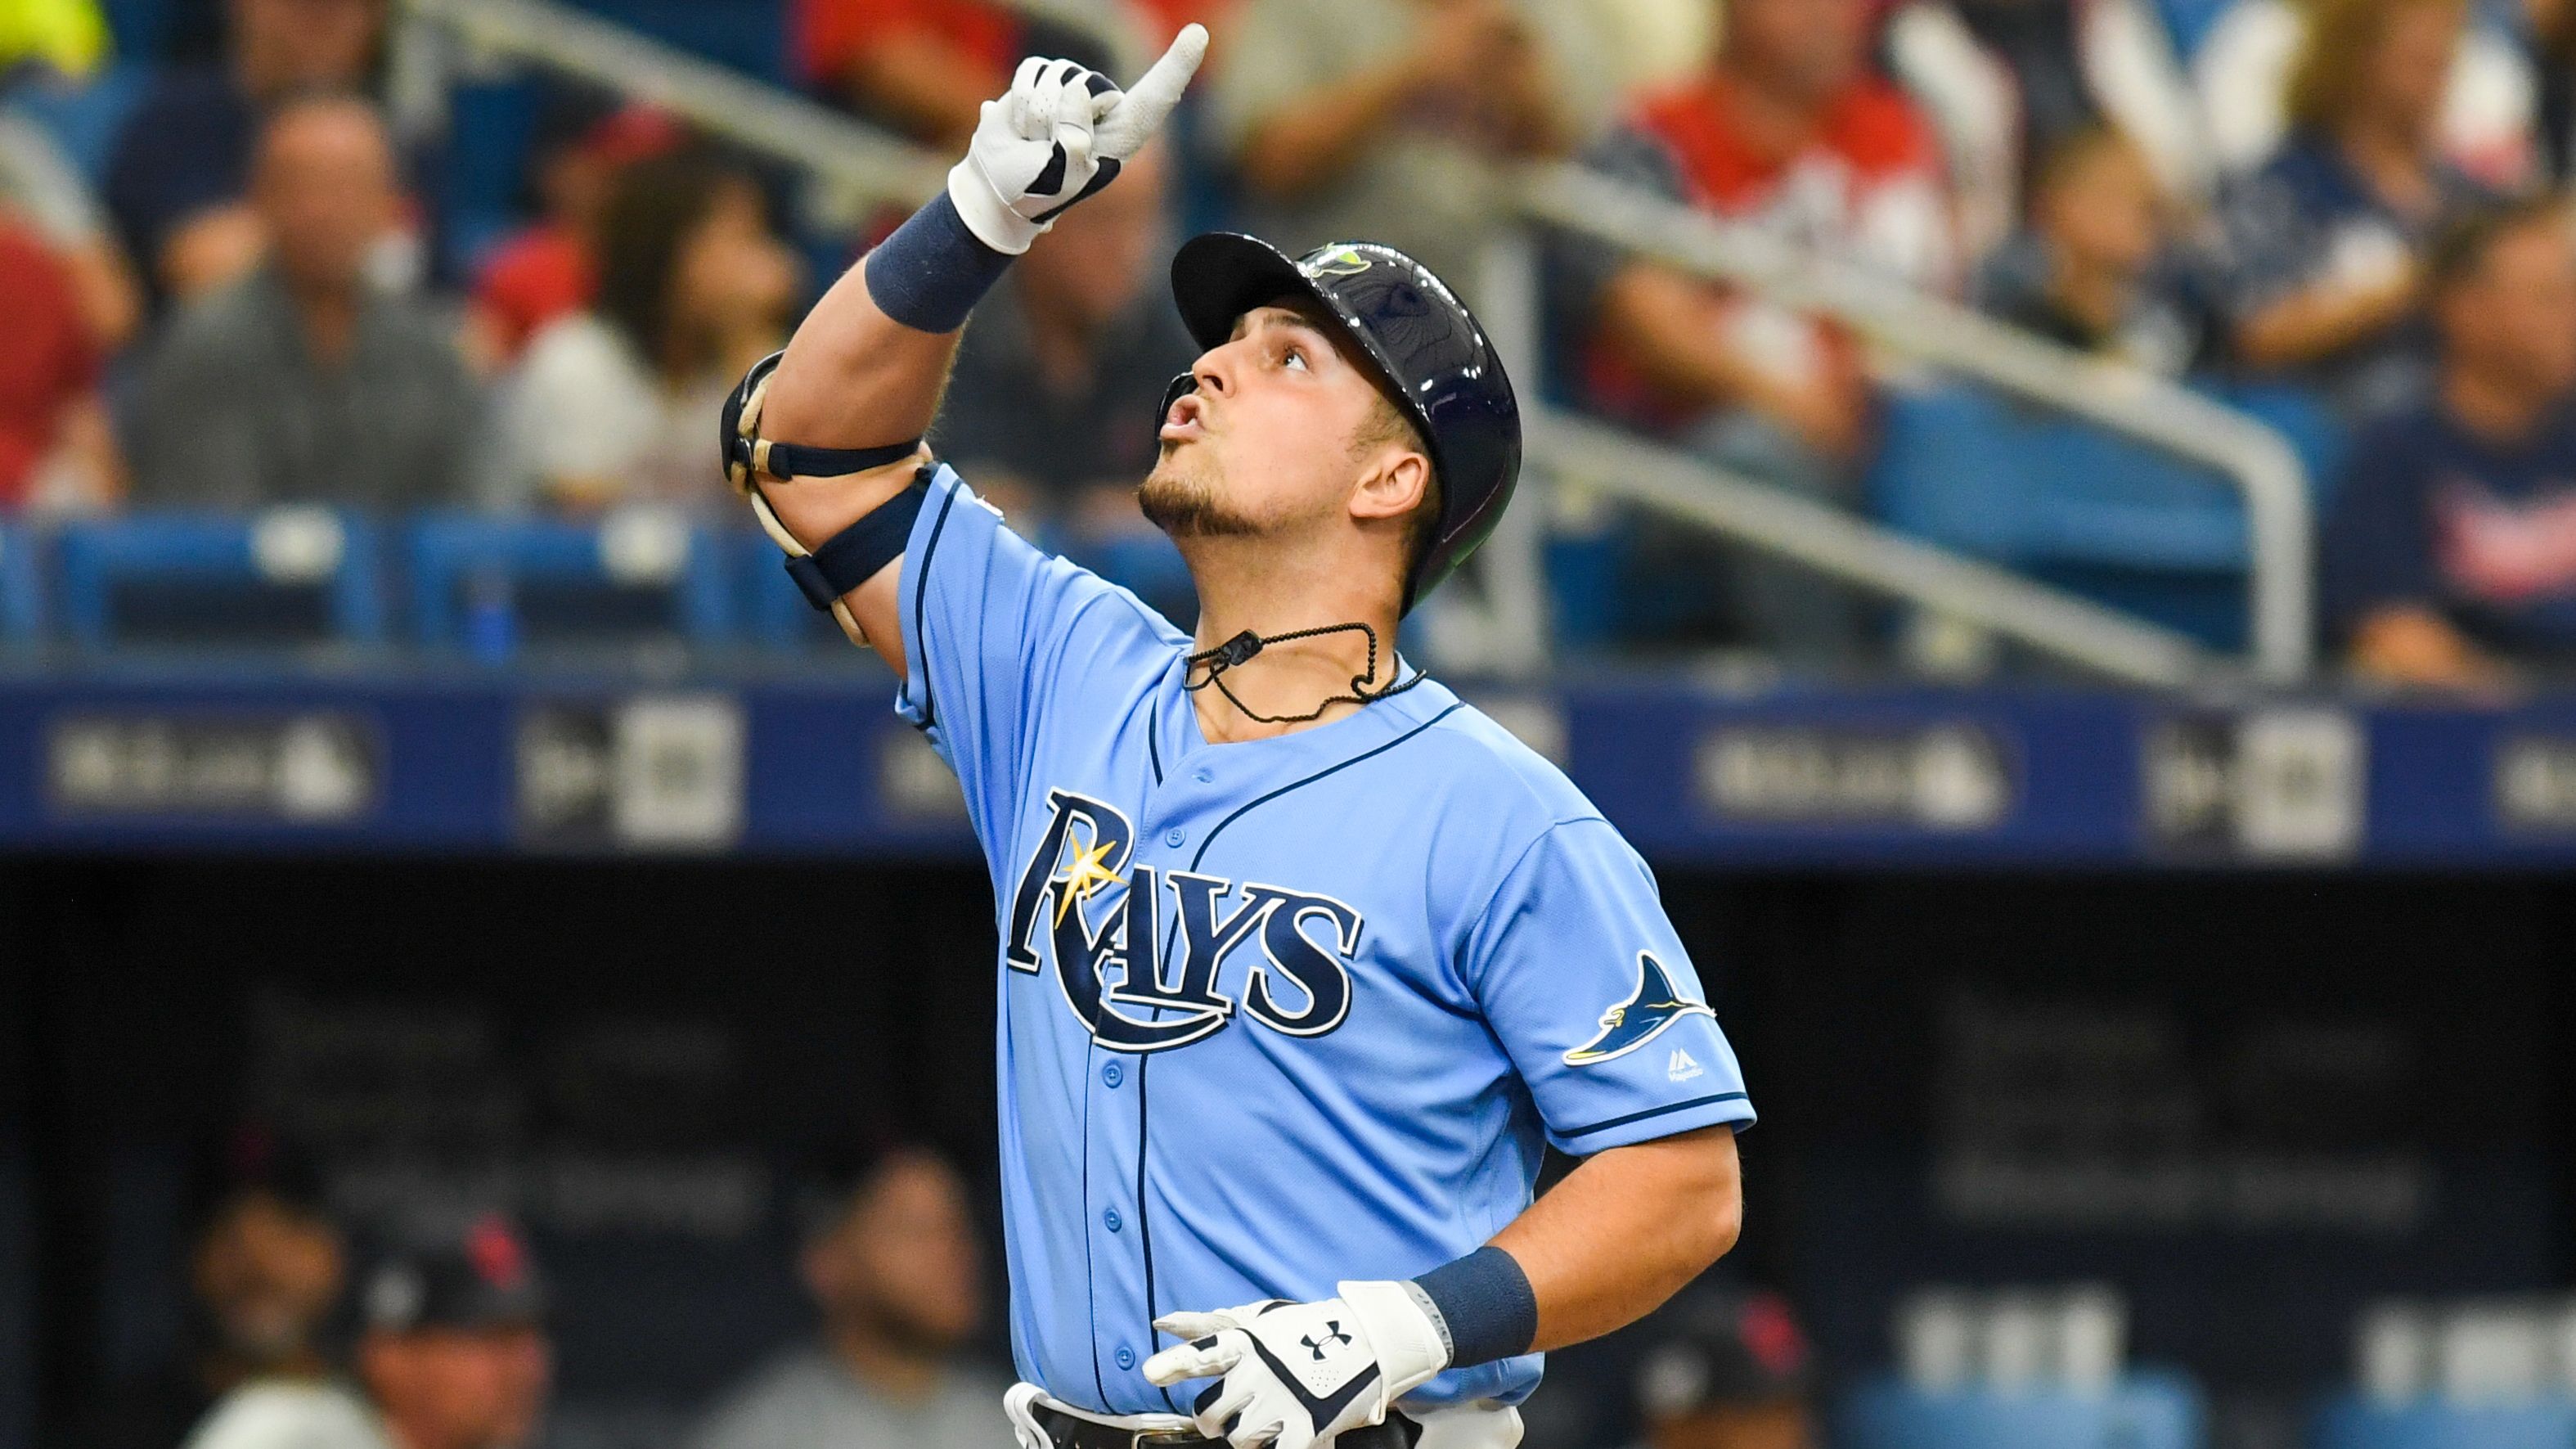 MLB News: Tampa Bay Rays call up Nate Lowe - McCovey Chronicles